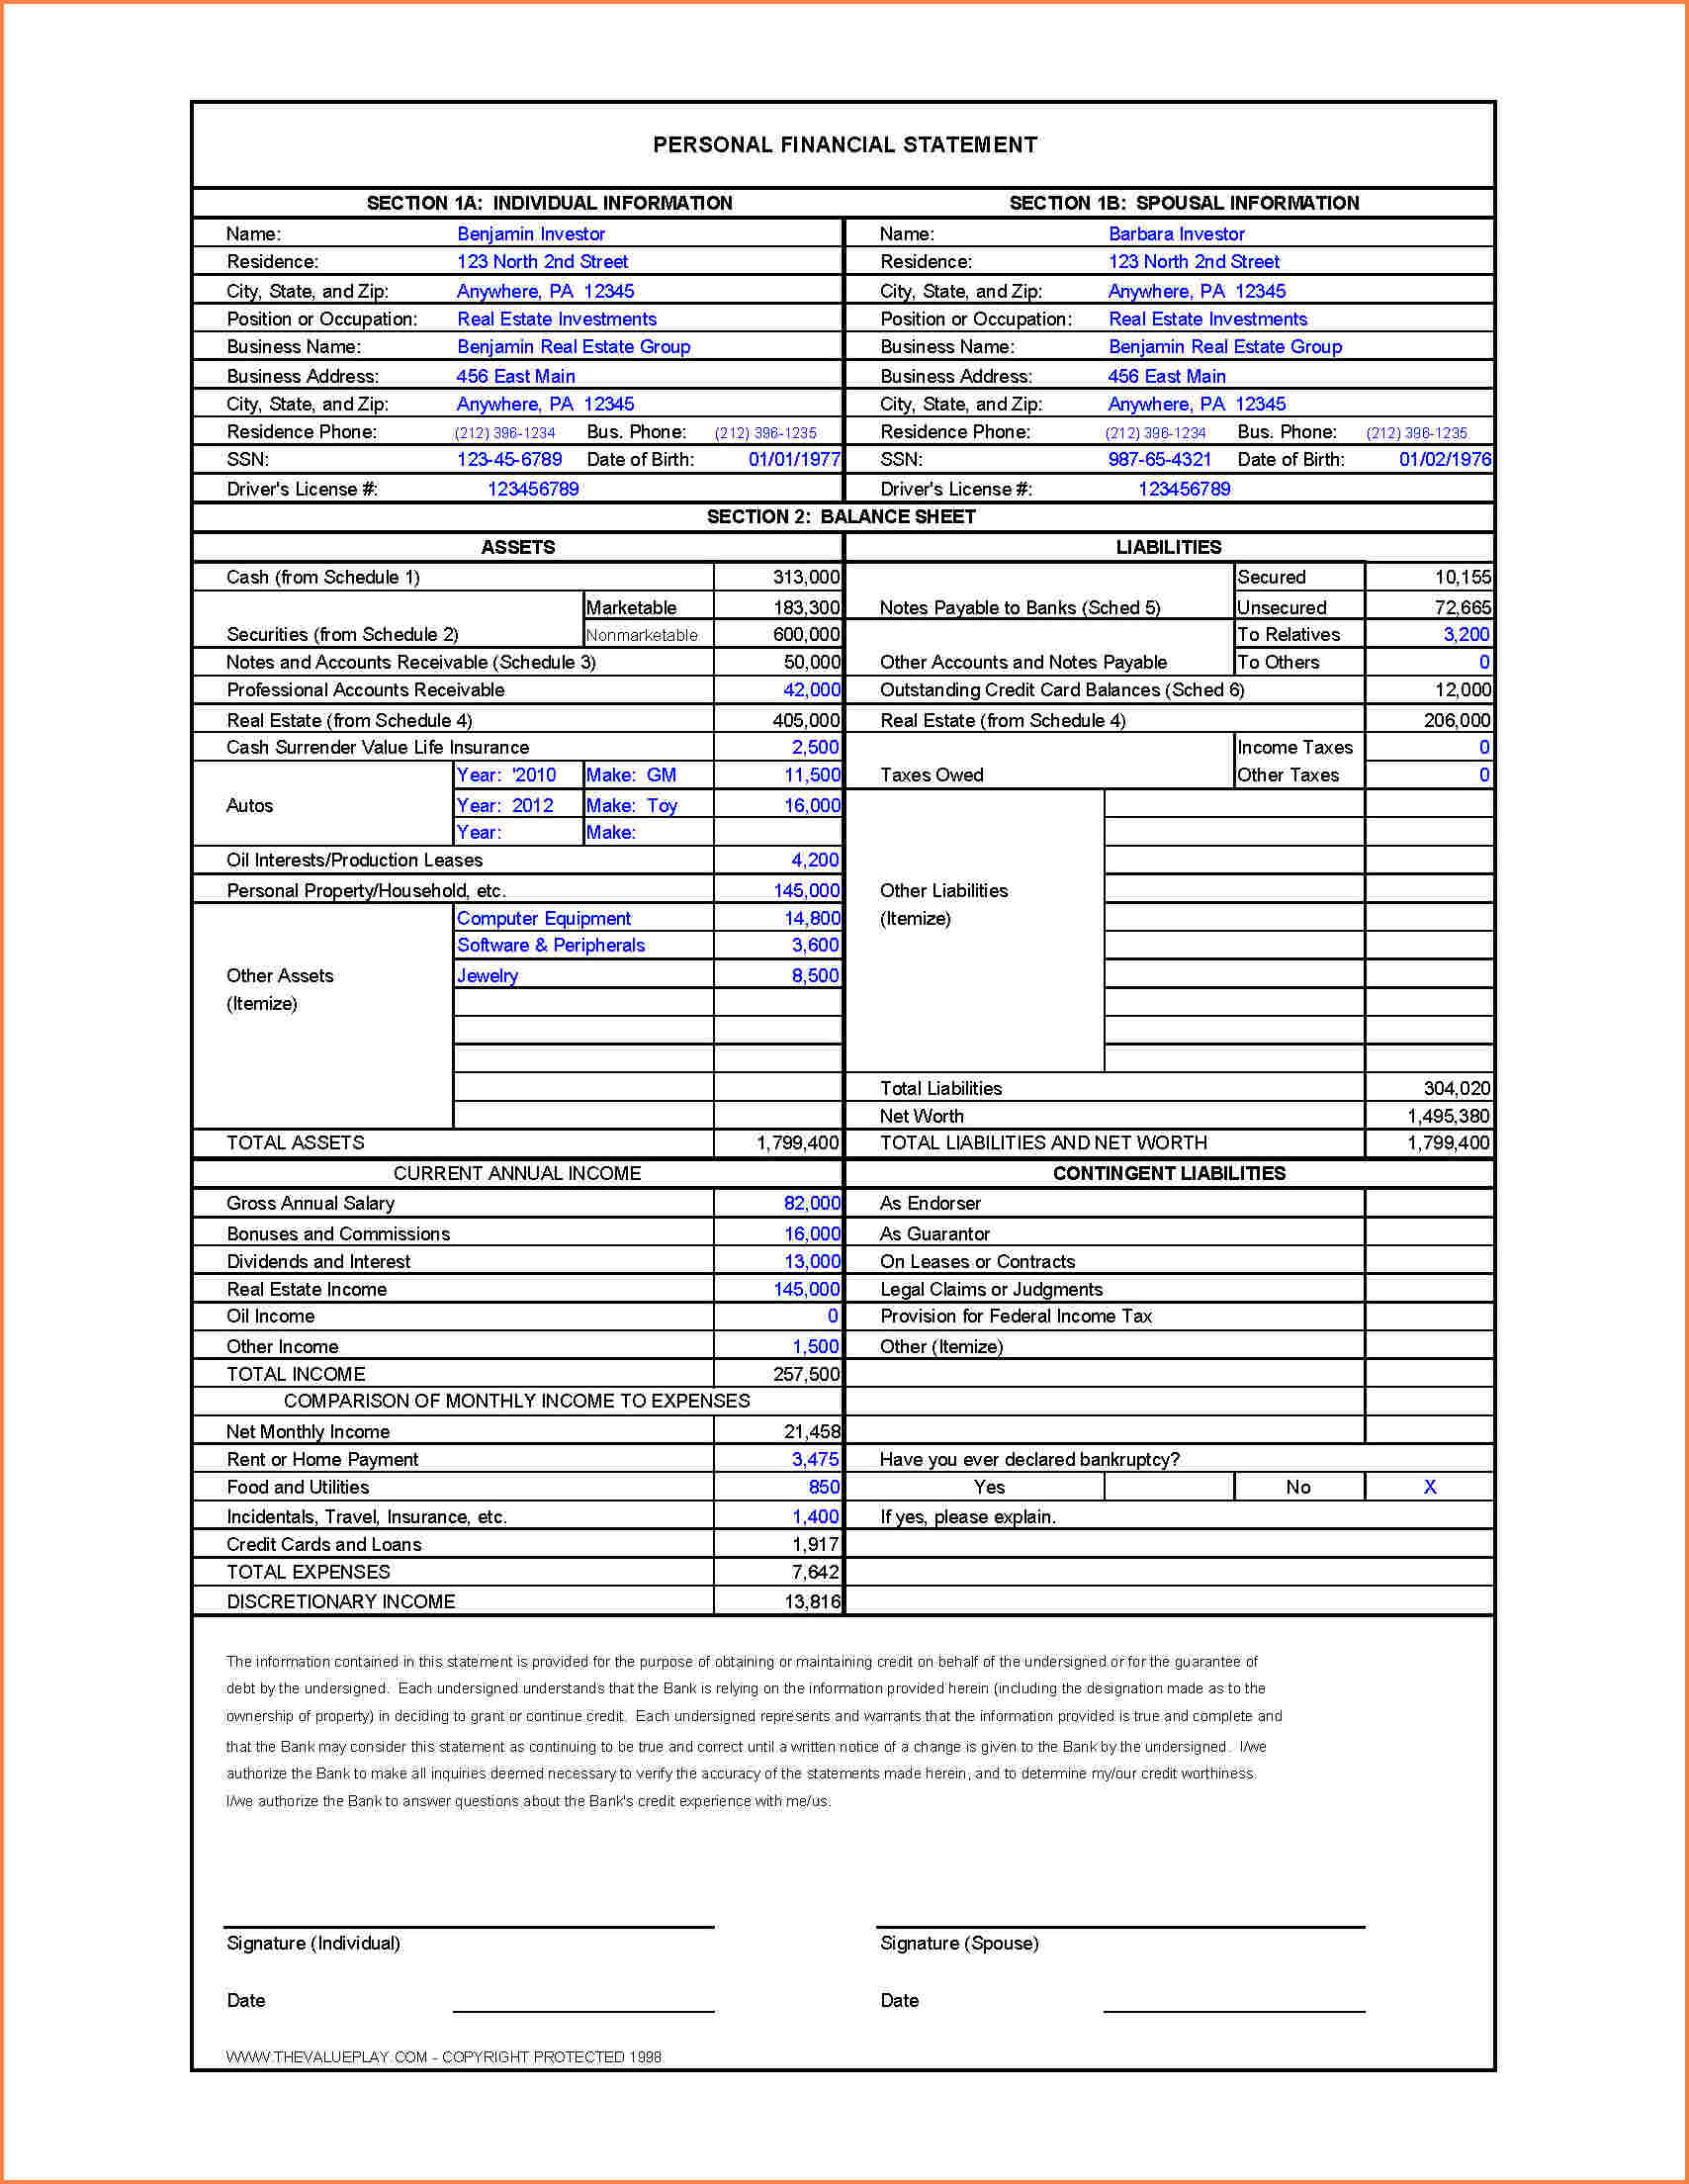 Blank Personal Financial Statement Pdf Finacial   cannabislounge.co